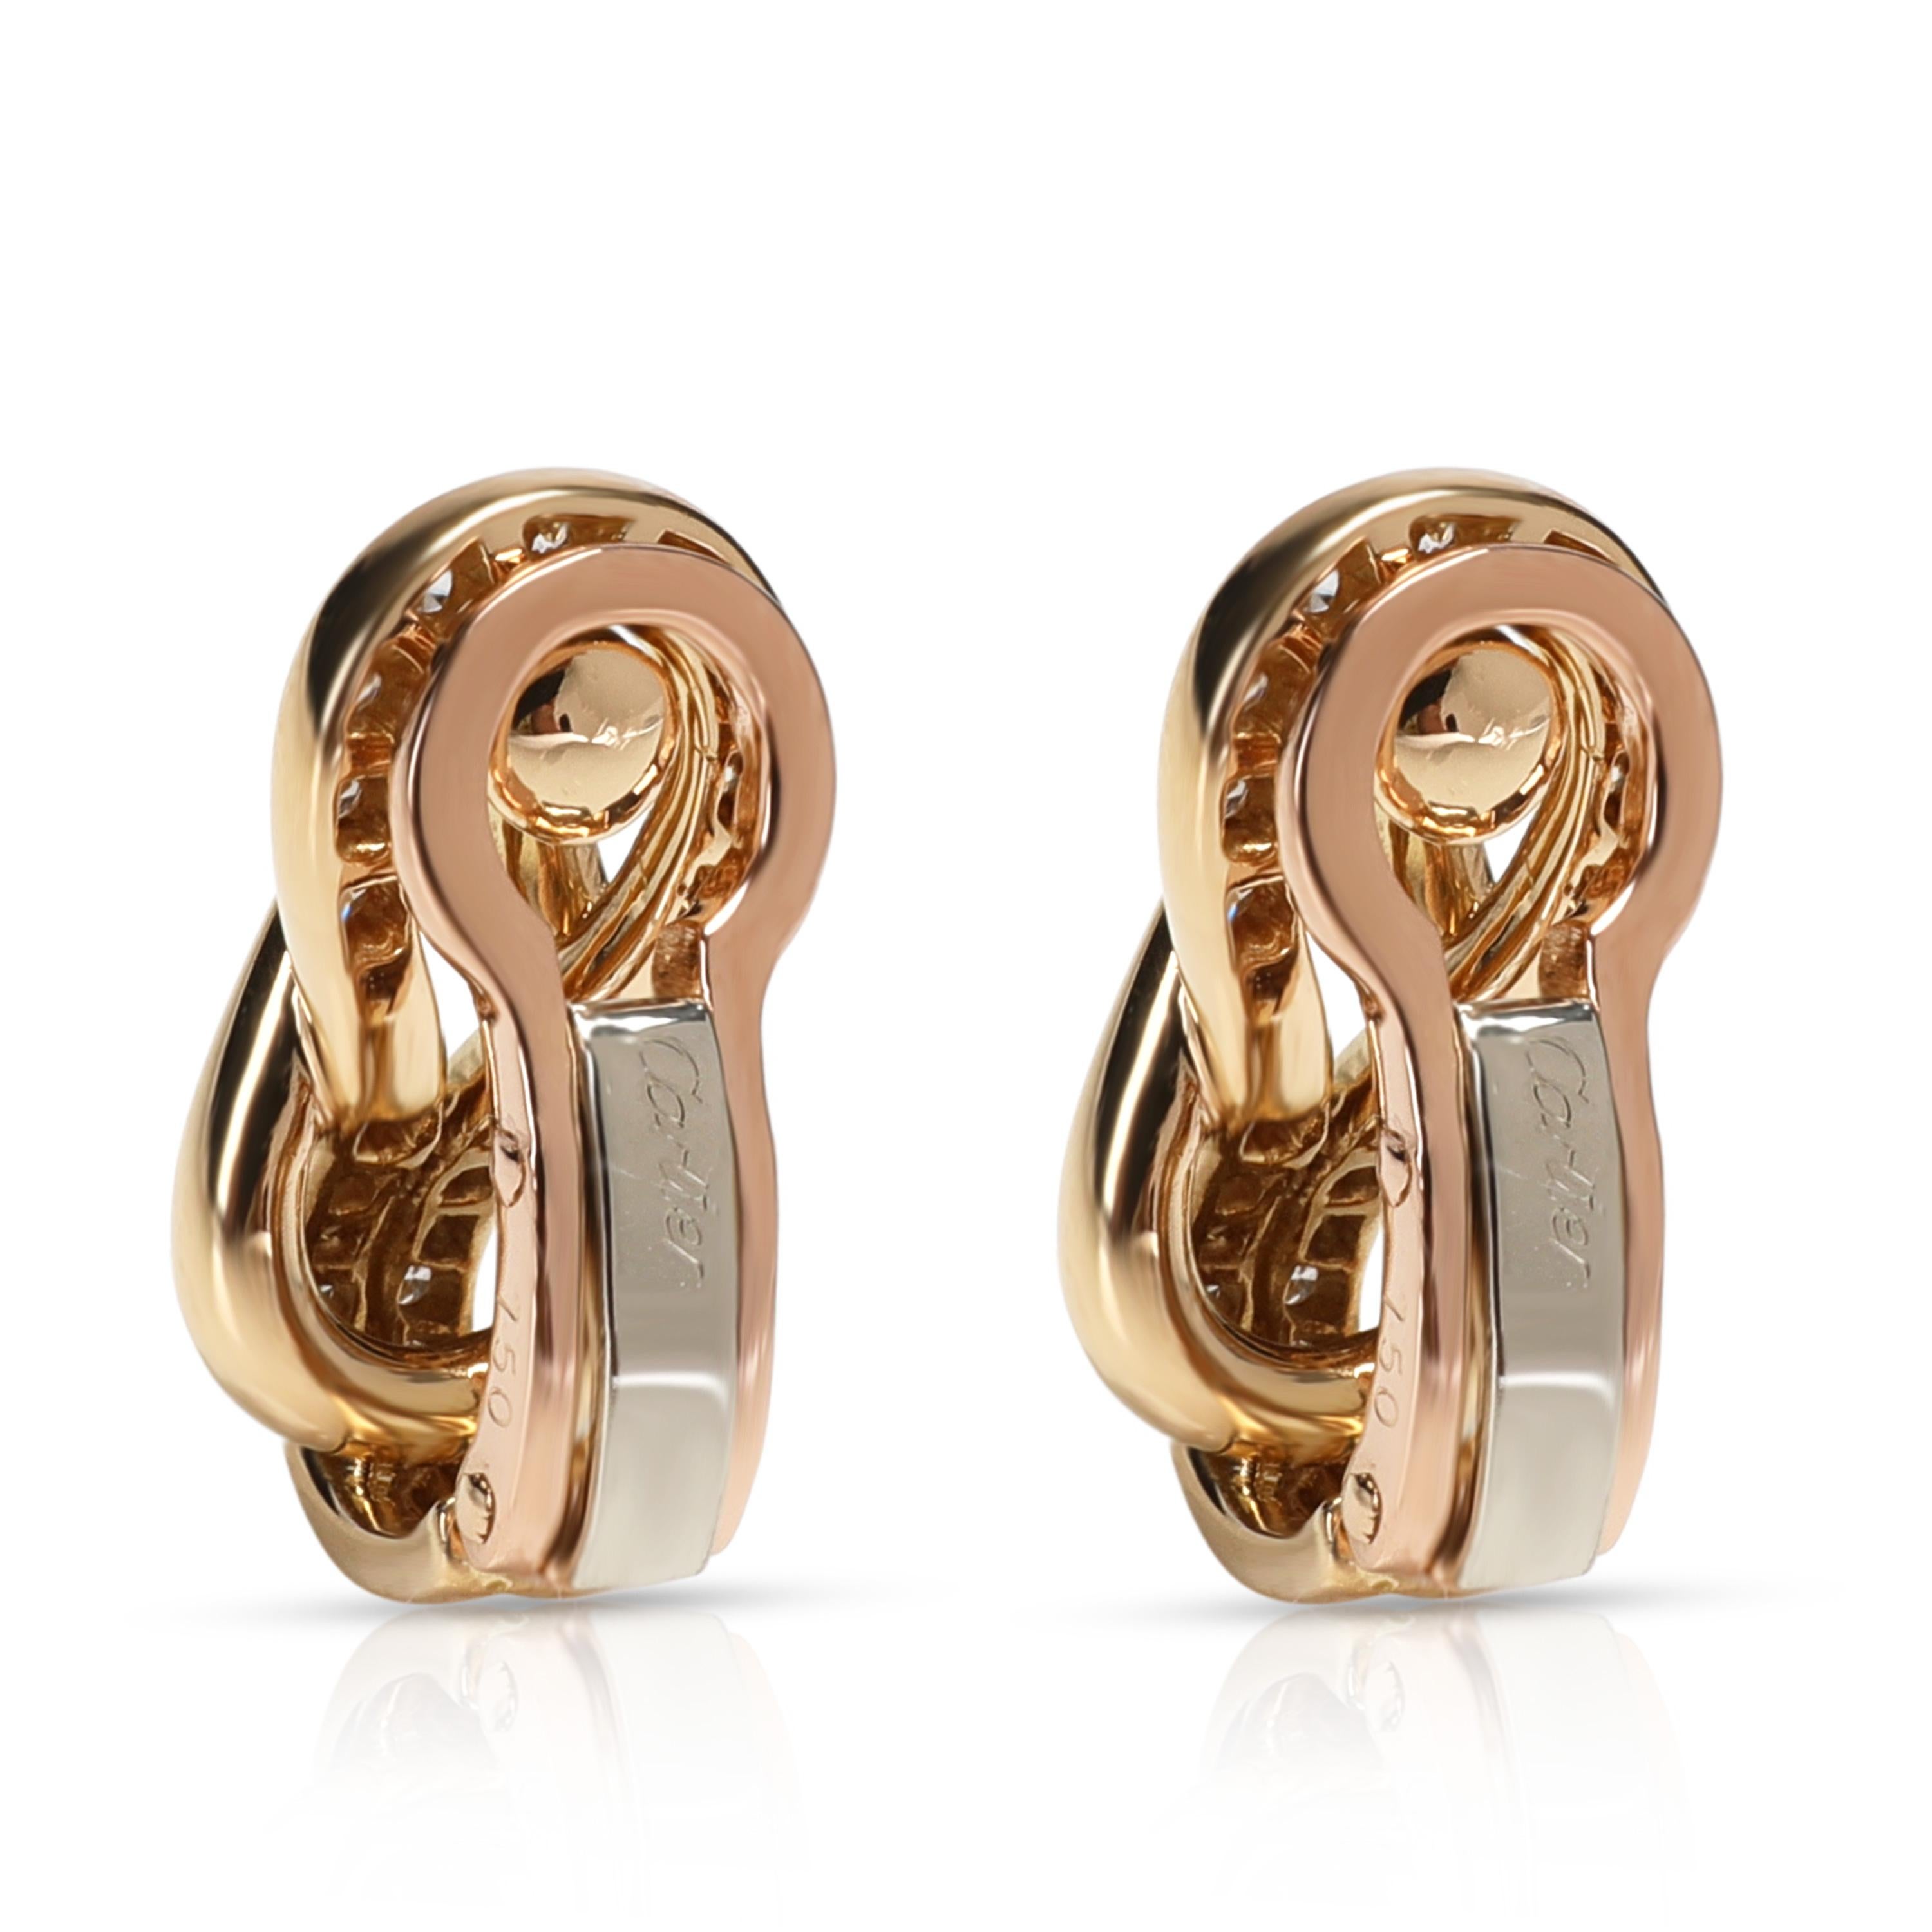 

Cartier Love Knot Diamond Earrings in 18K Yellow Gold 0.42 CTW

PRIMARY DETAILS
SKU: 106005
Listing Title: Cartier Love Knot Diamond Earrings in 18K Yellow Gold 0.42 CTW
Condition Description: Retails for 8,500 USD. In excellent condition and